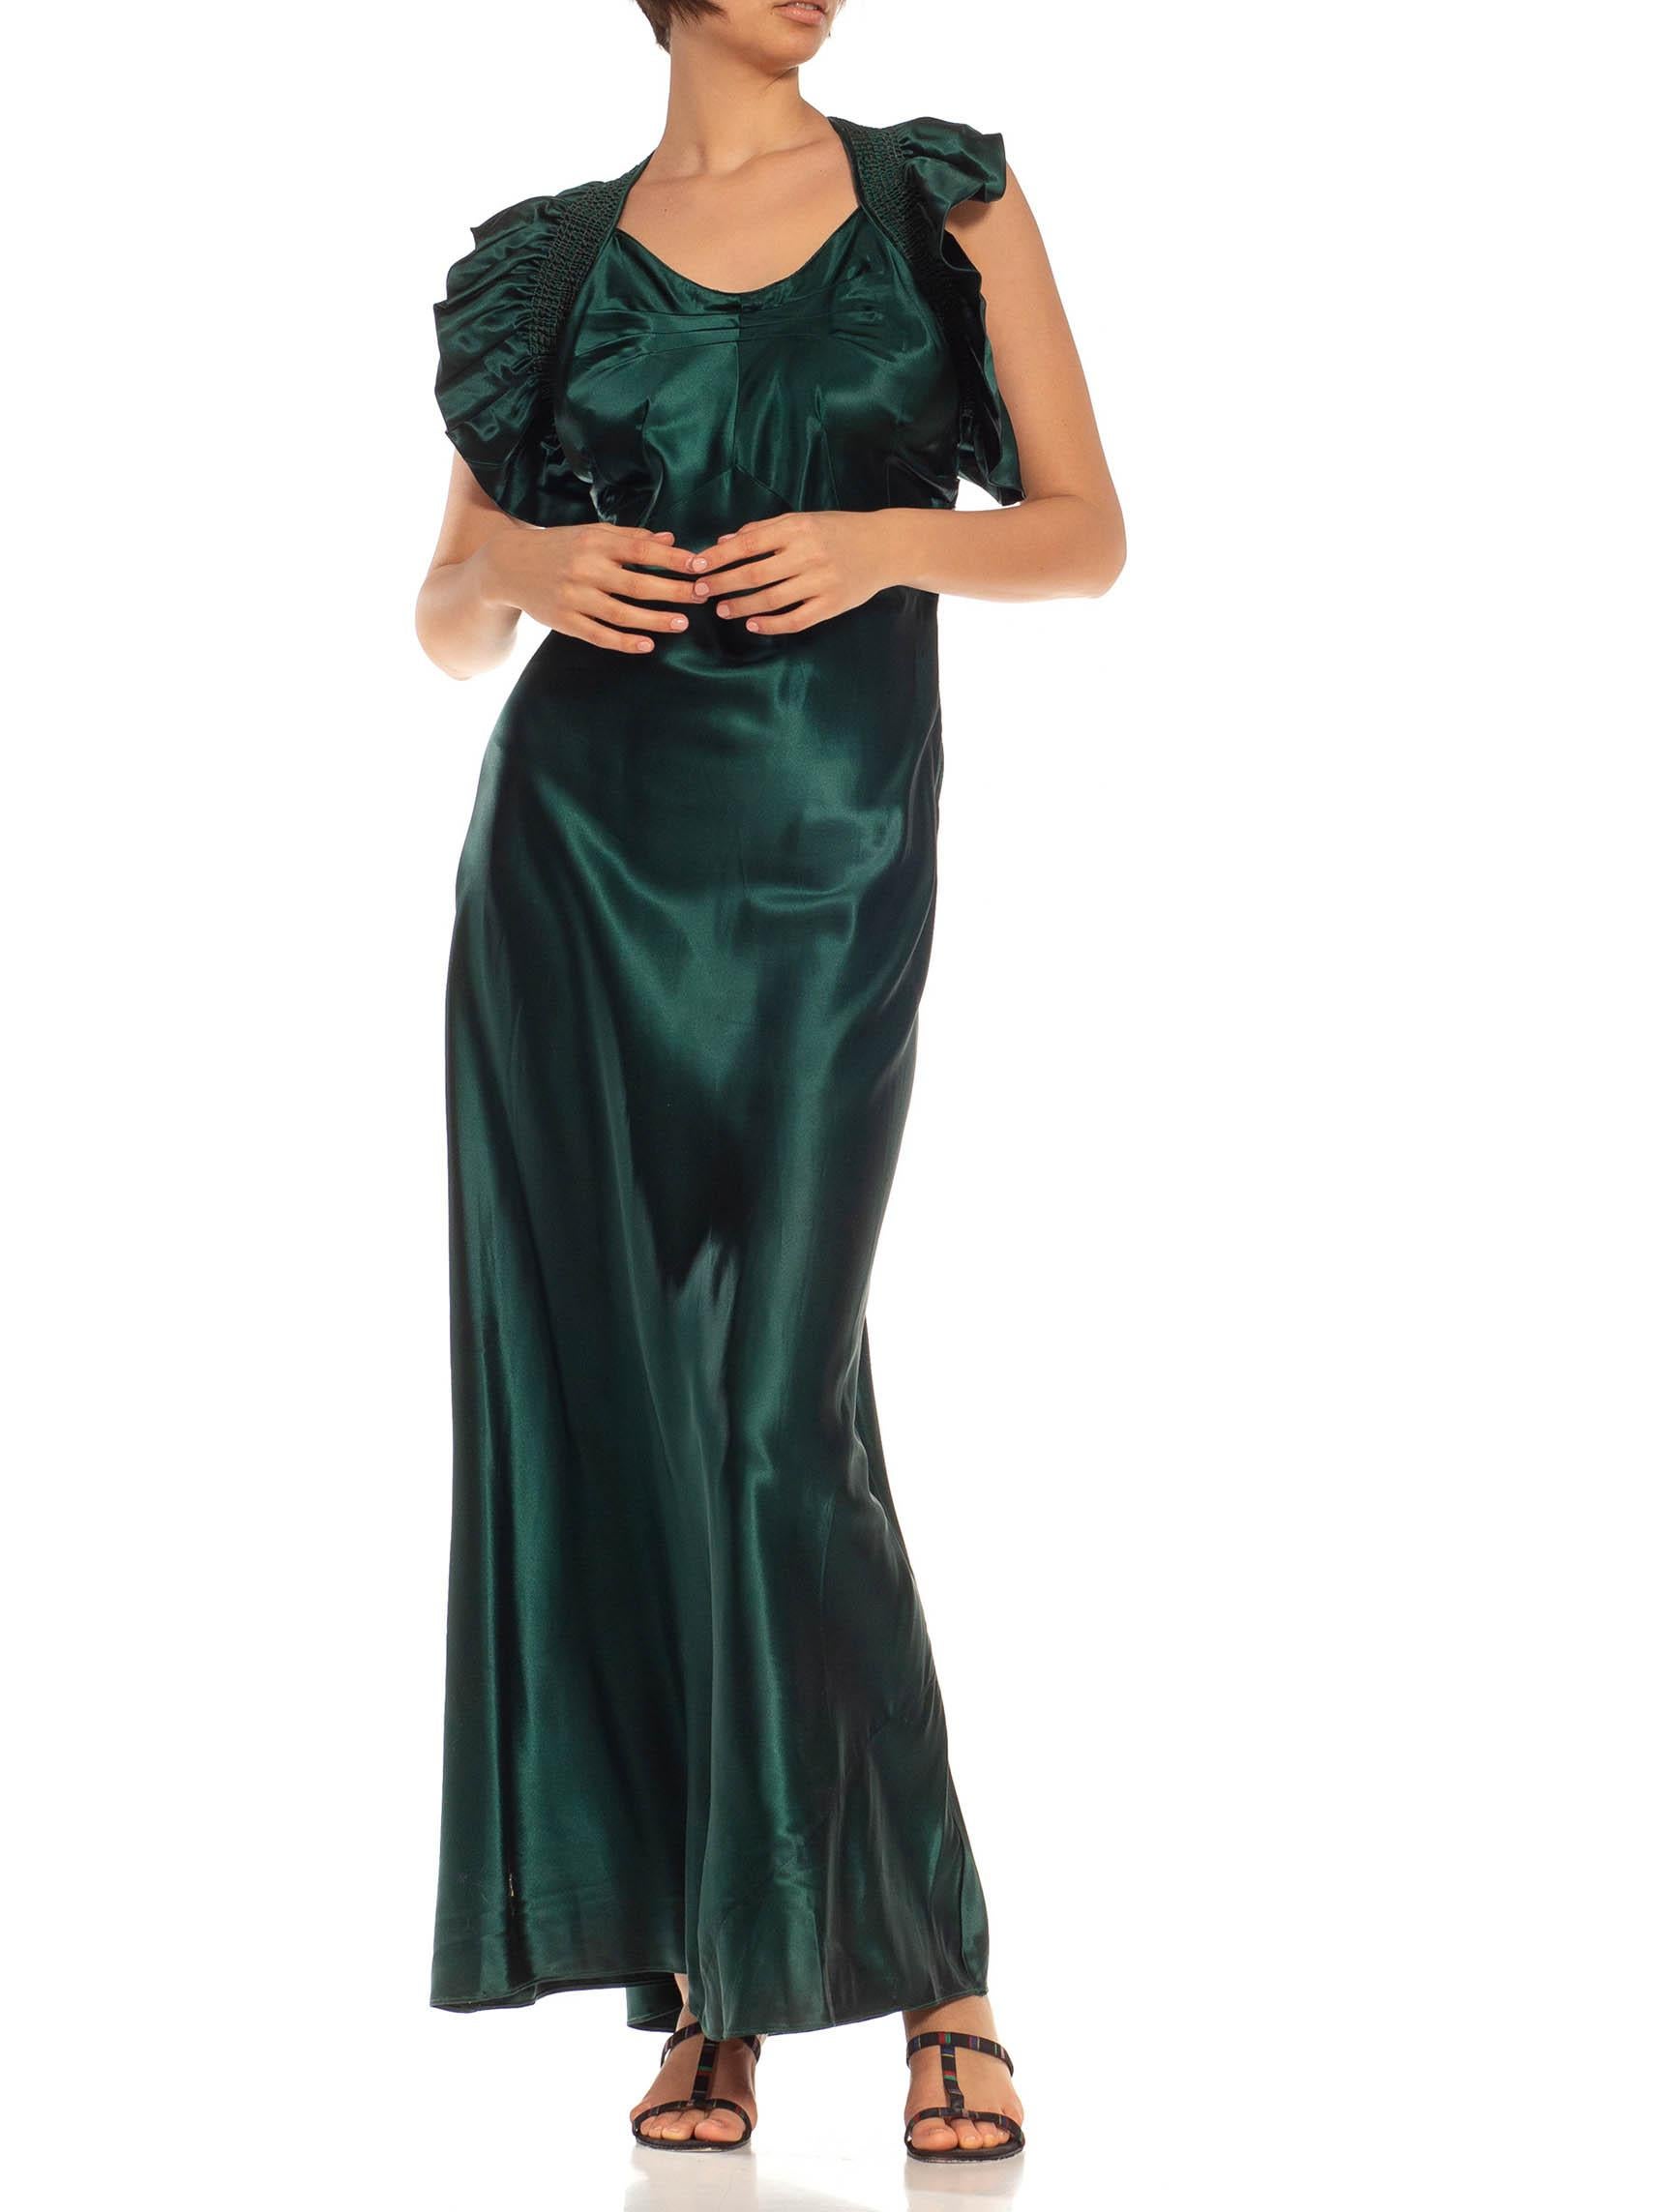 1930S Emerald Green Bias Cut Acetate Duchess Satin Open Back Ruffled Gown In Excellent Condition For Sale In New York, NY